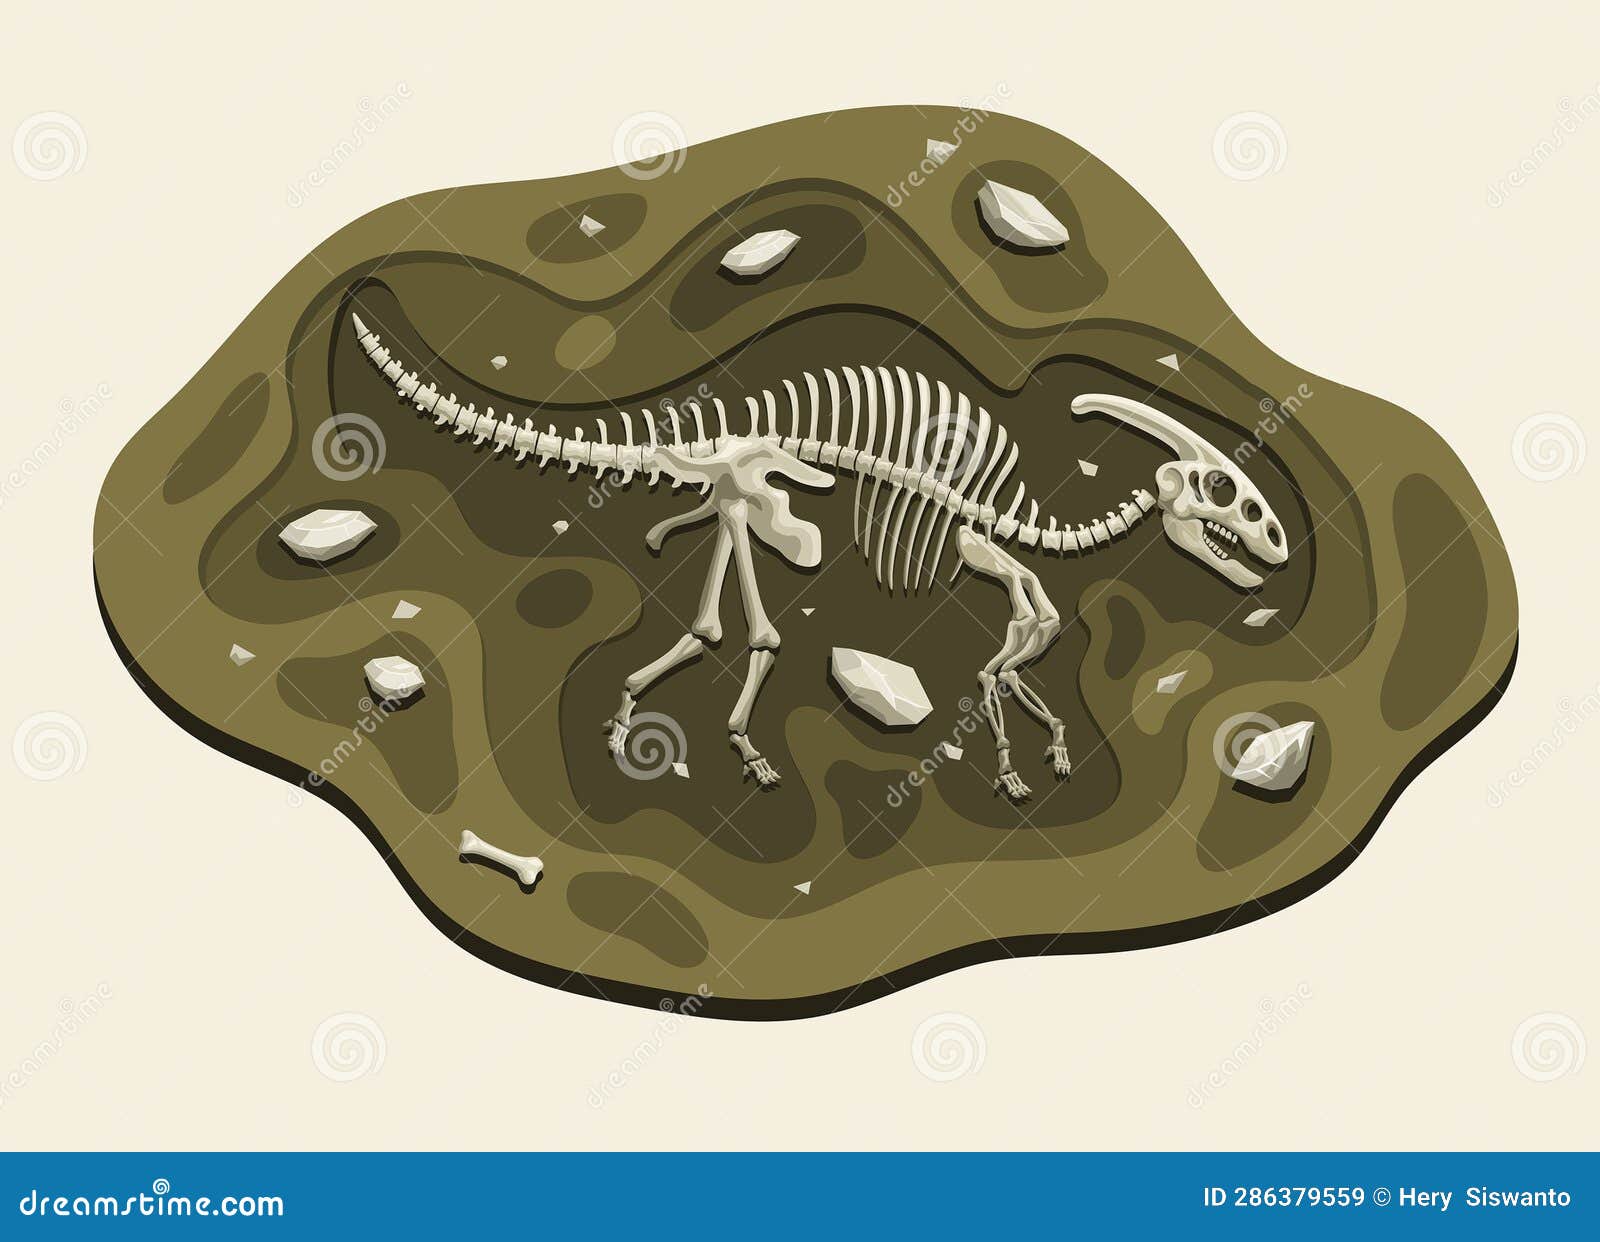 parasaurus dinosaurs archaeology fossil cartoon discover in the ground